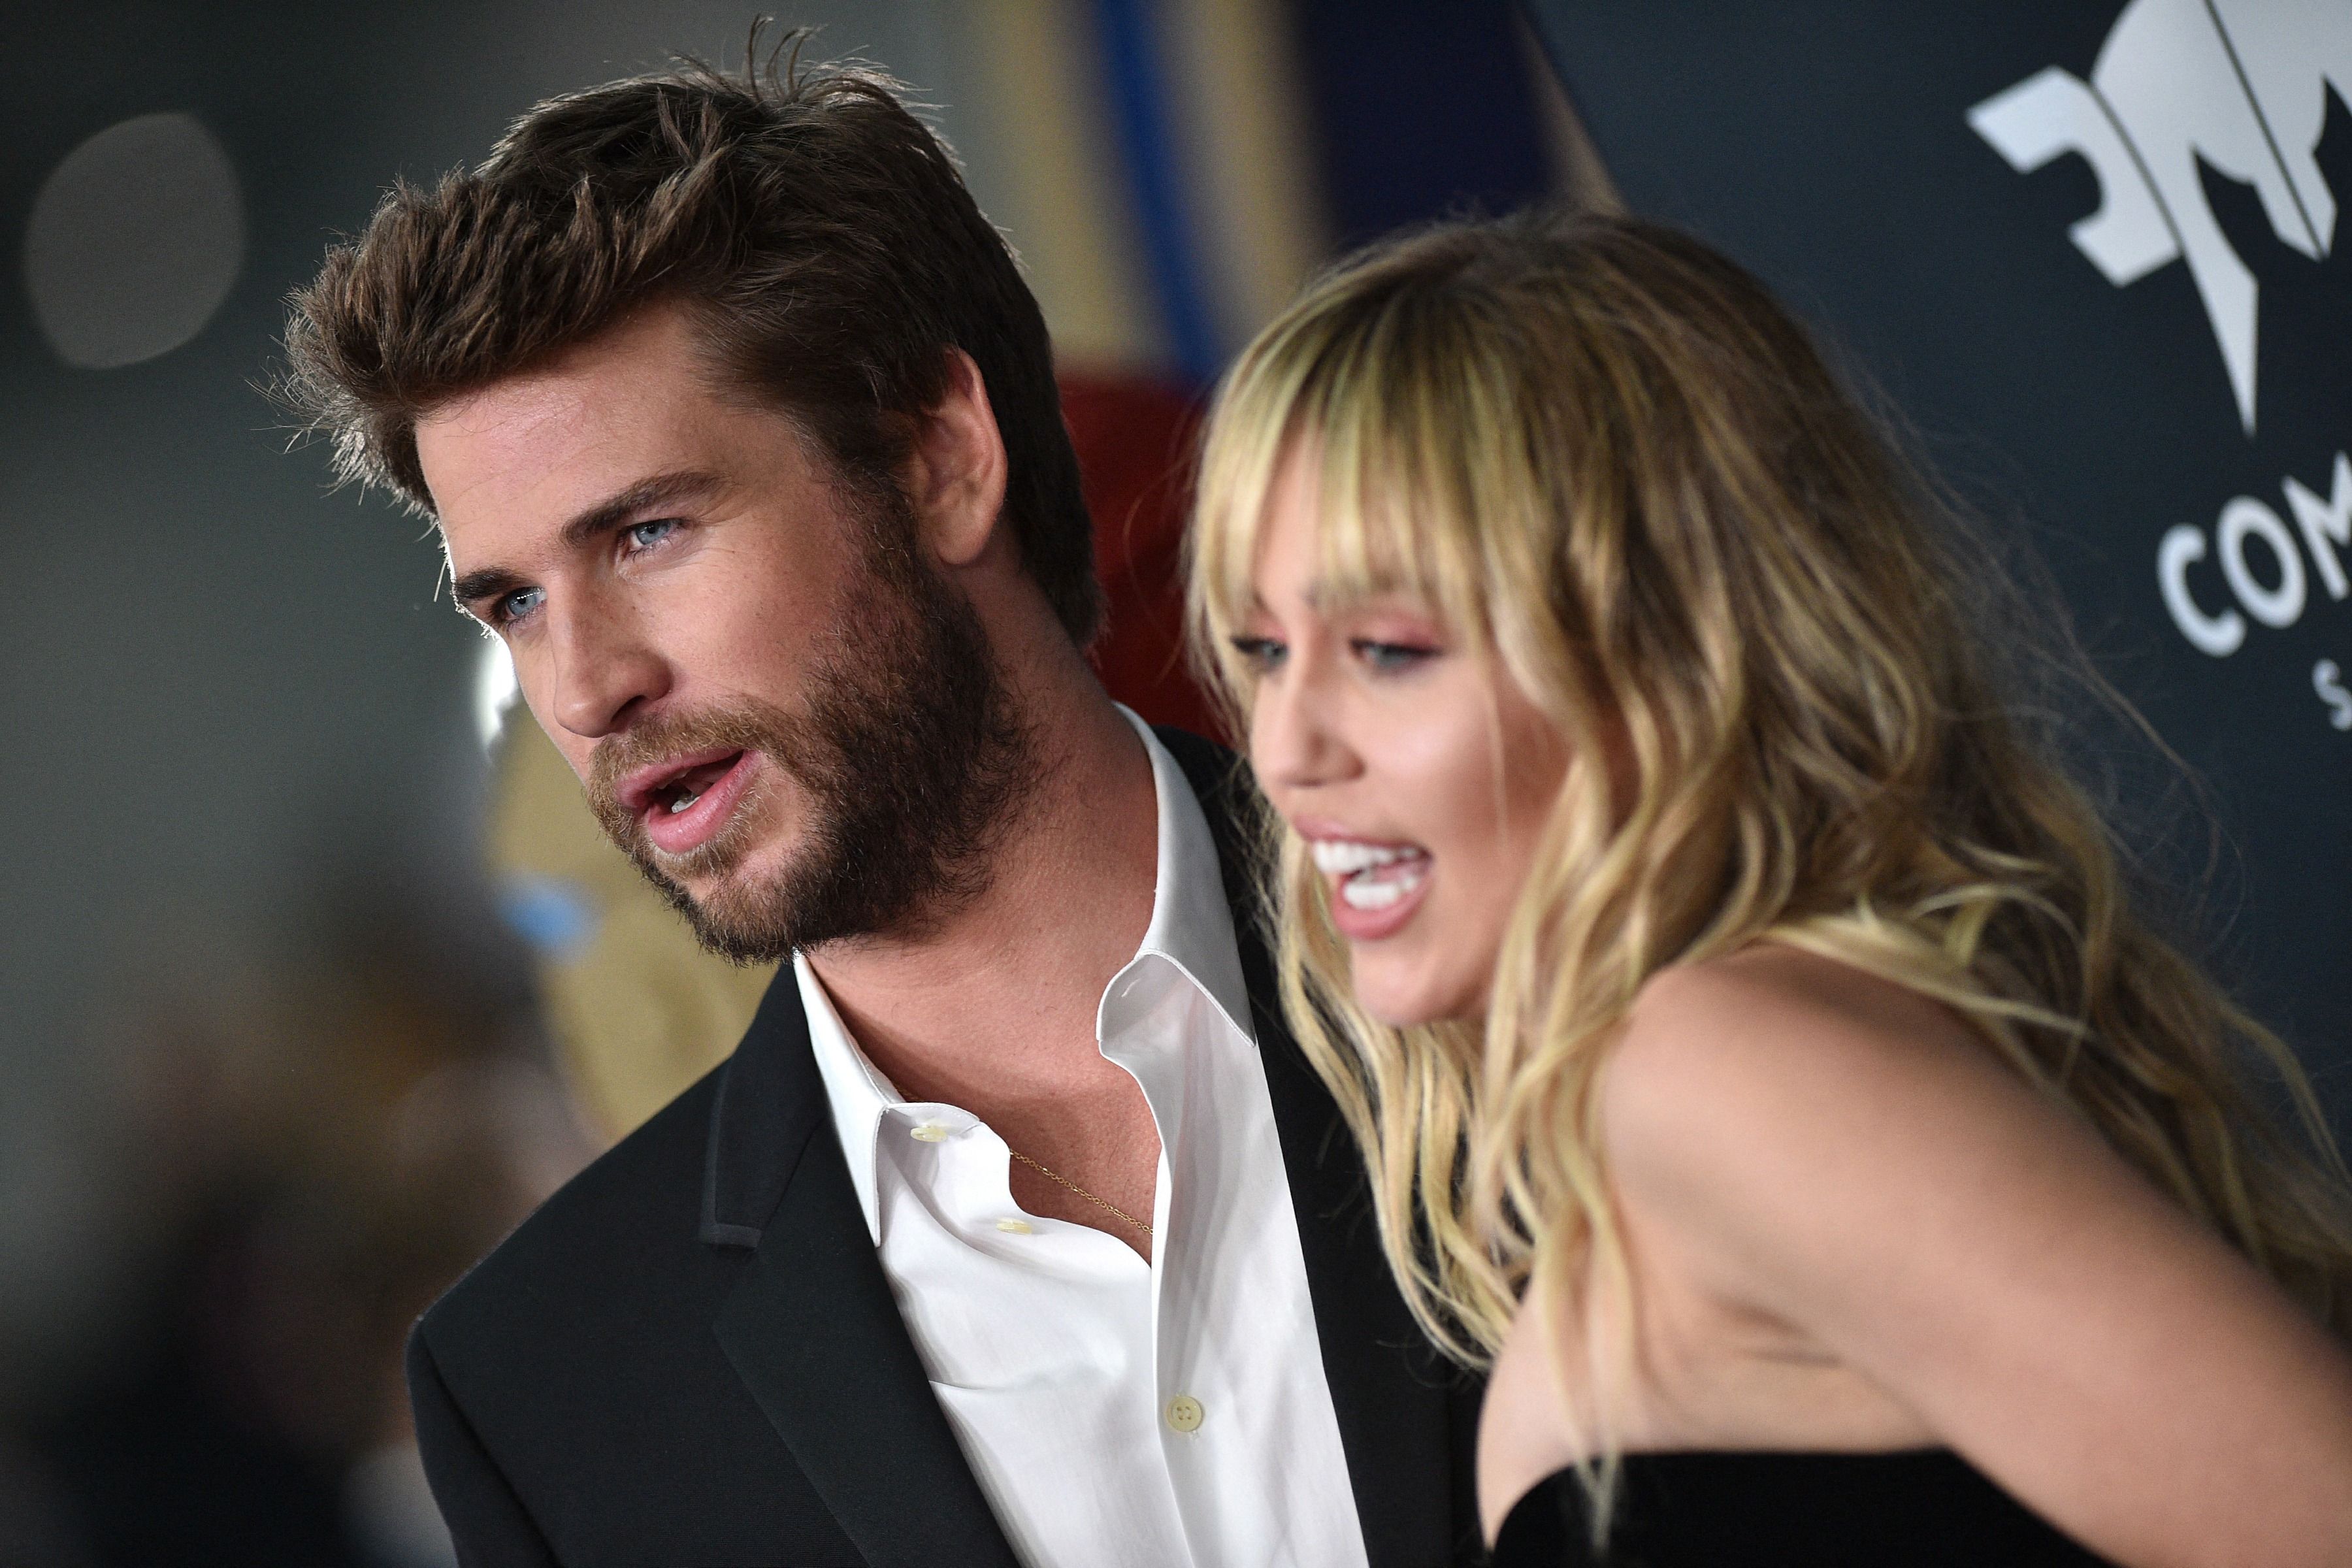 Did Miley Cyrus Reach Out To Liam Hemsworth After His Brother’s Diagnosis?